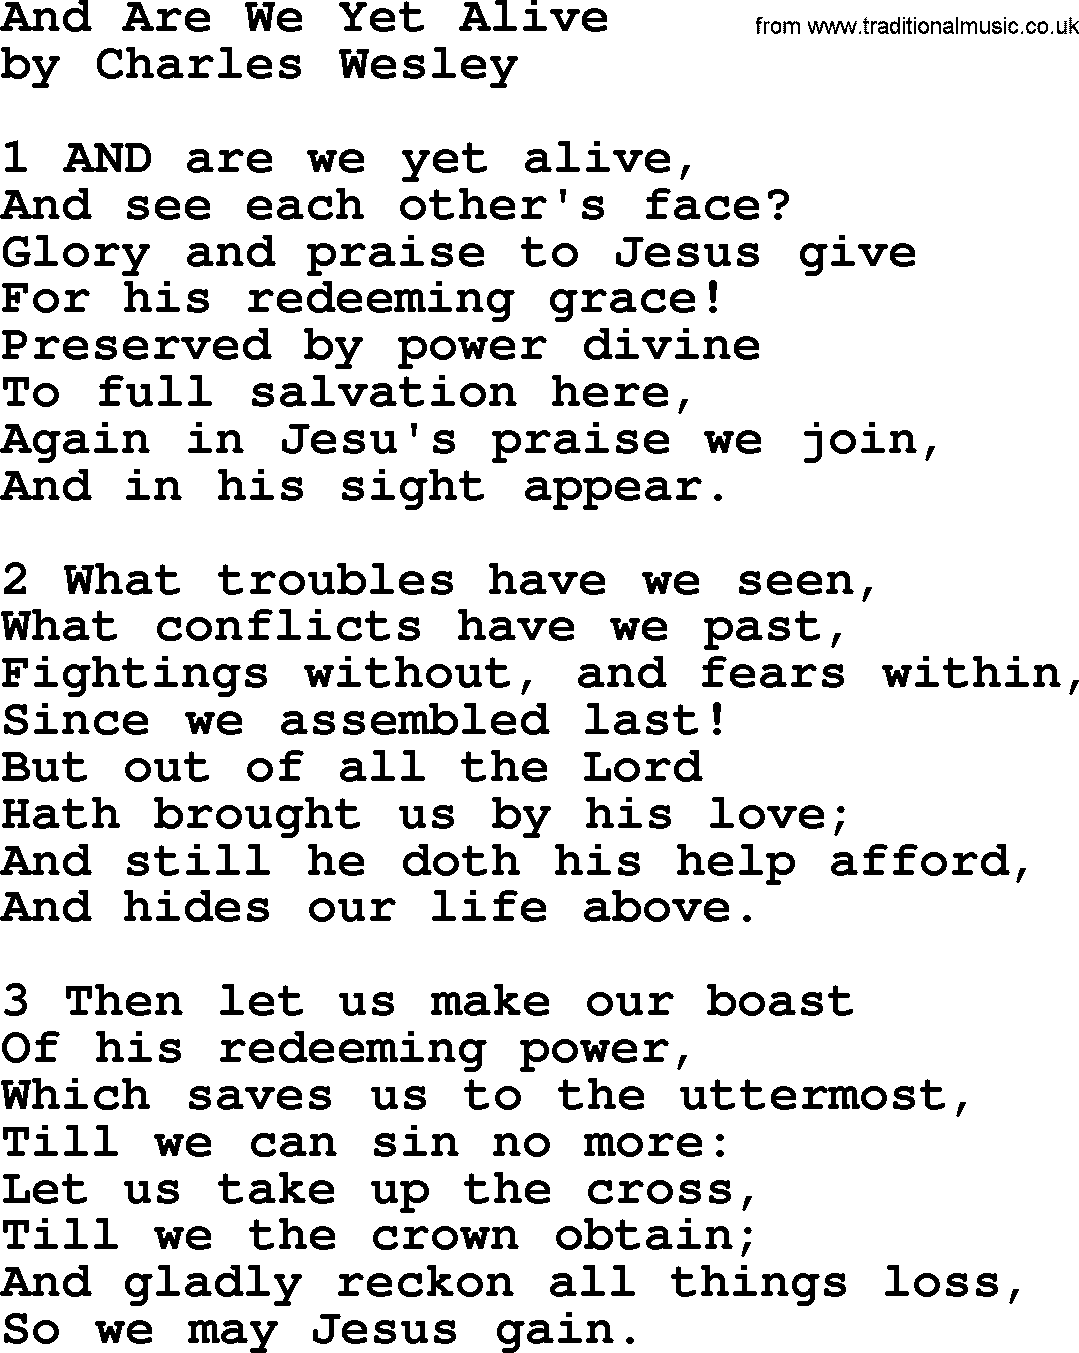 Charles Wesley hymn: And Are We Yet Alive, lyrics